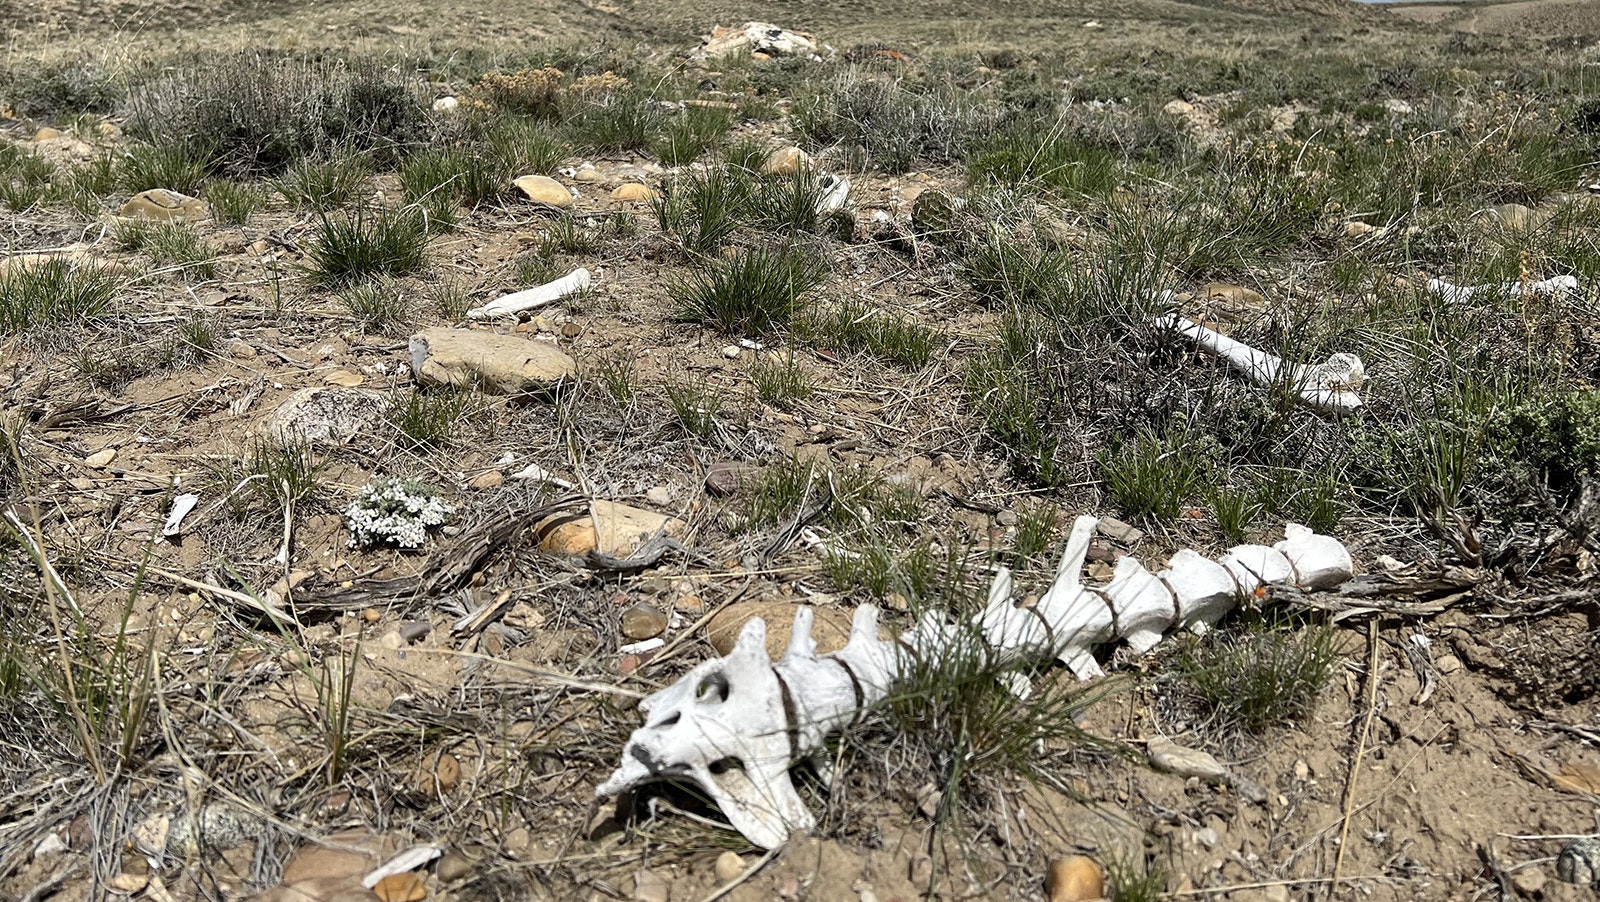 Mother Nature is reclaiming the remains of thousands of antelope that died this winter near La Barge.